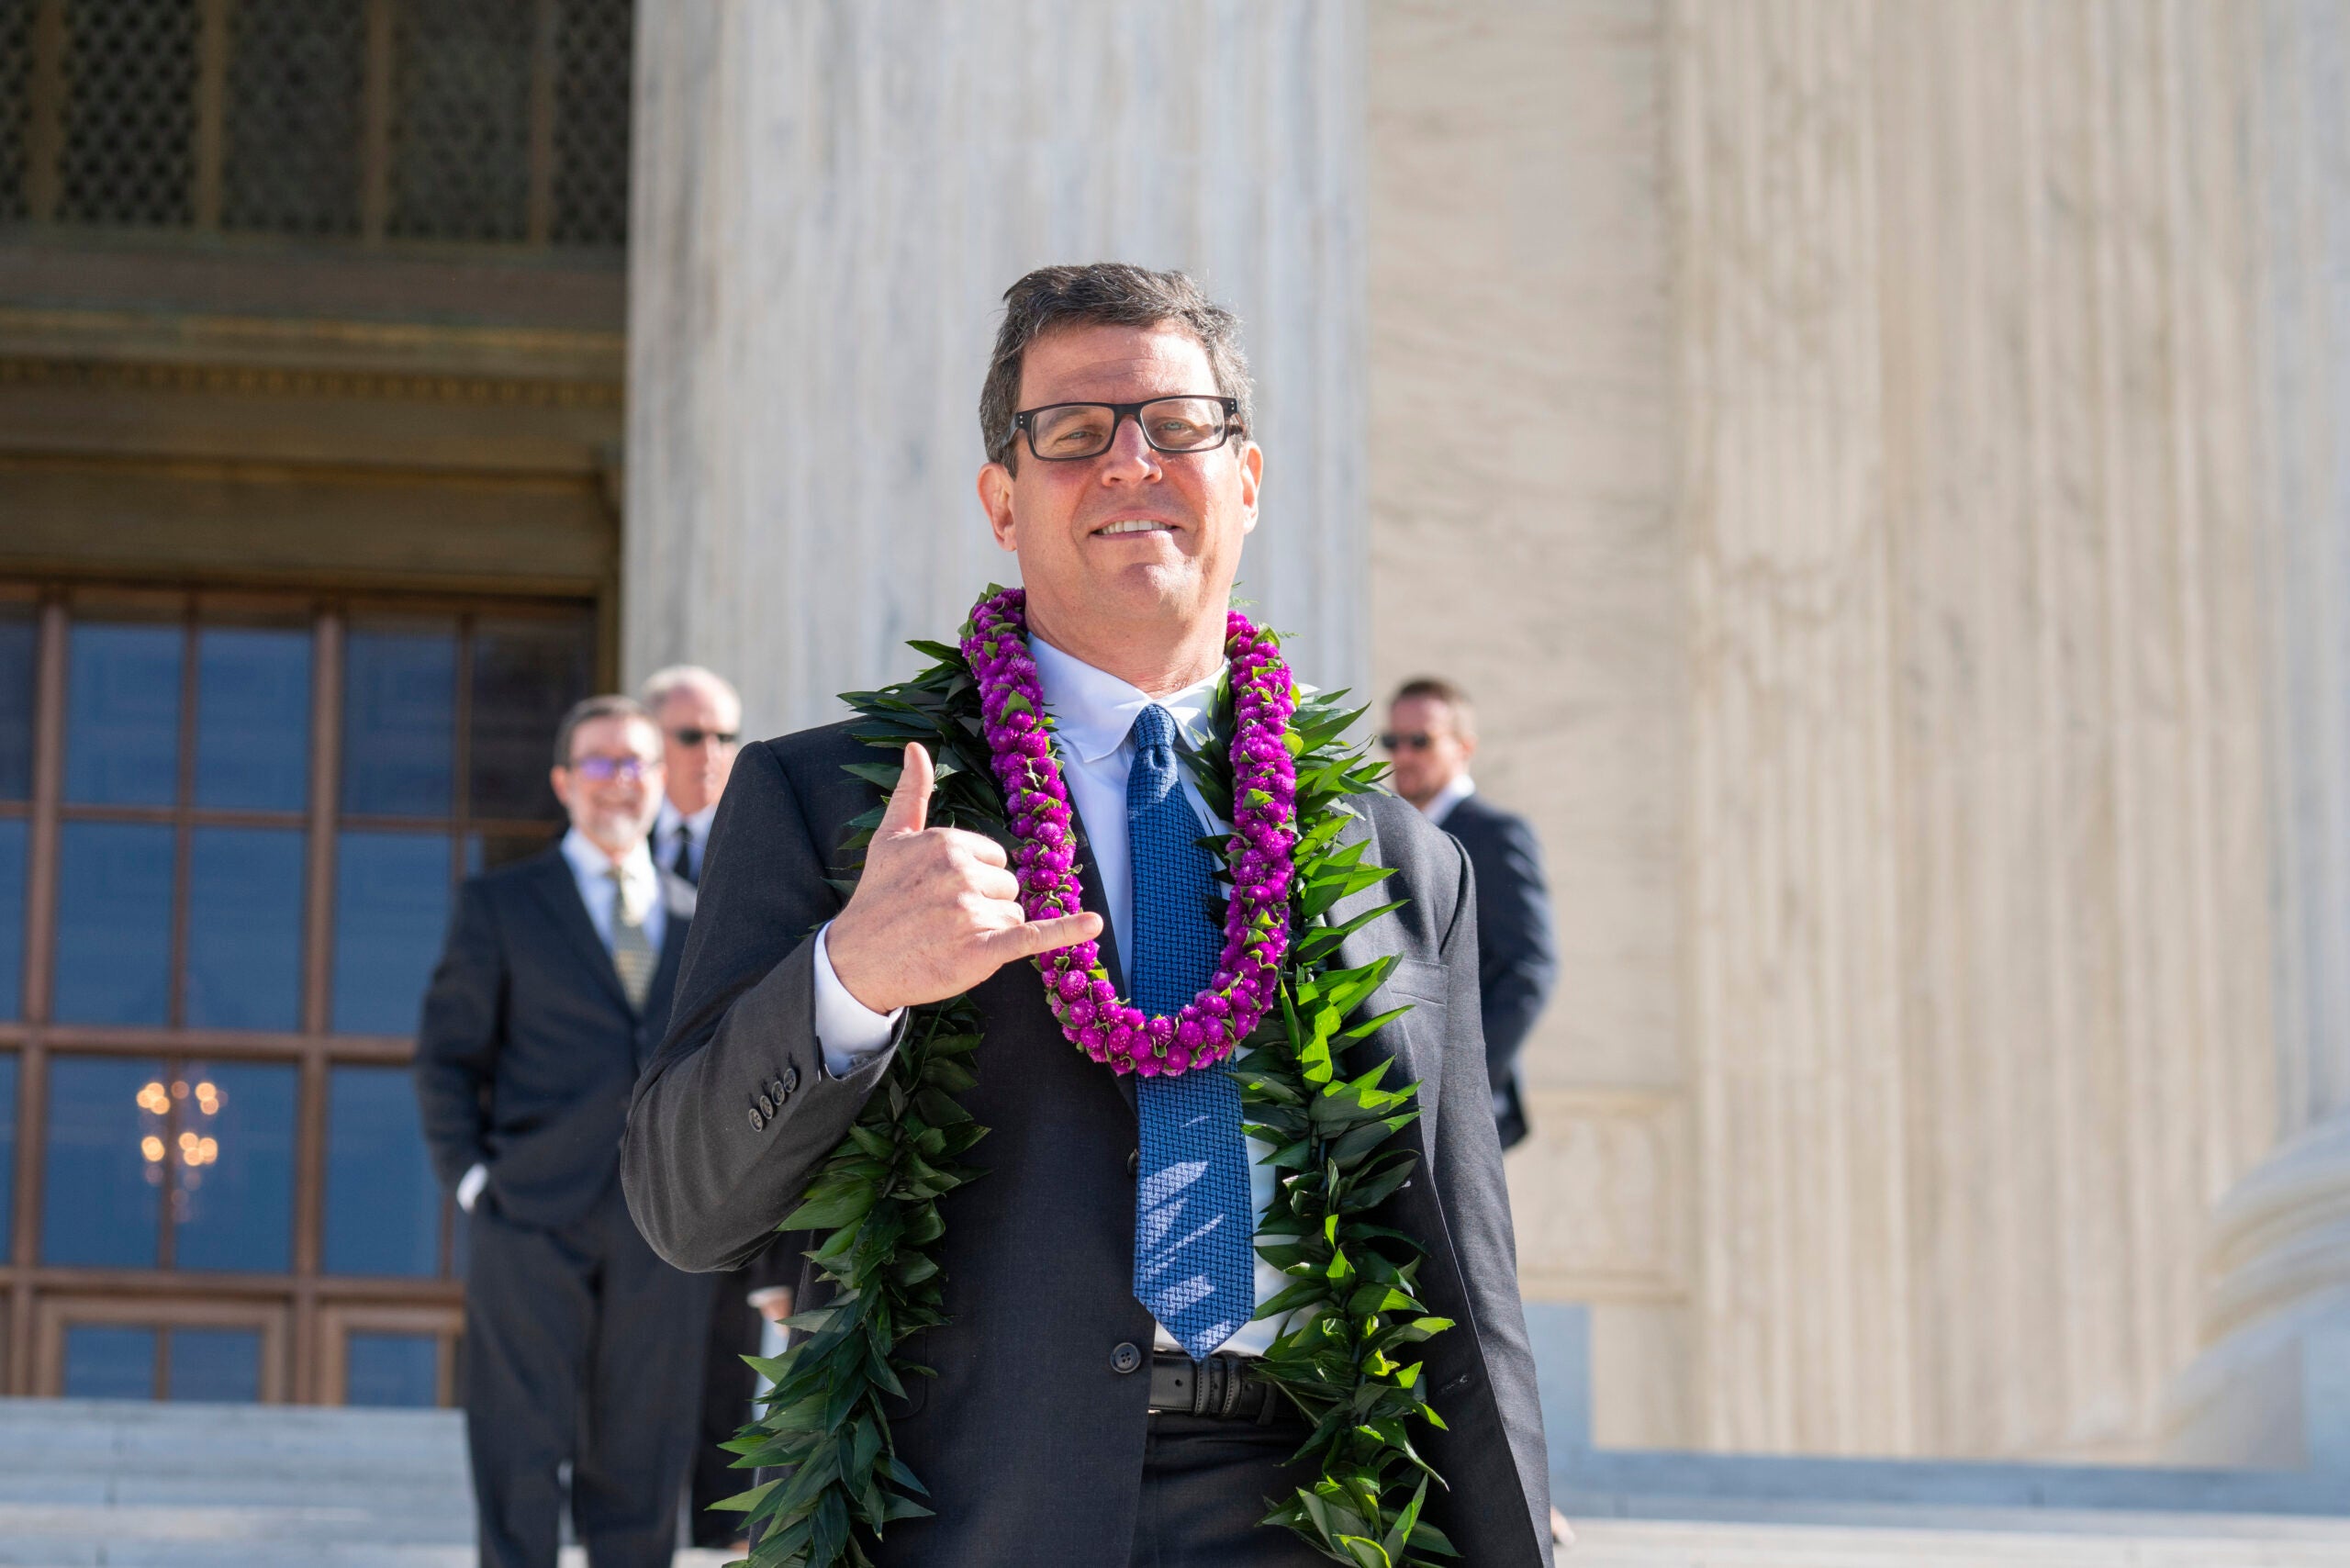 Earthjustice attorney David Henkin went to the Supreme Court to argue Hawaiʻi Wildlife Fund v. County of Maui.
(Melissa Lyttle for Earthjustice)